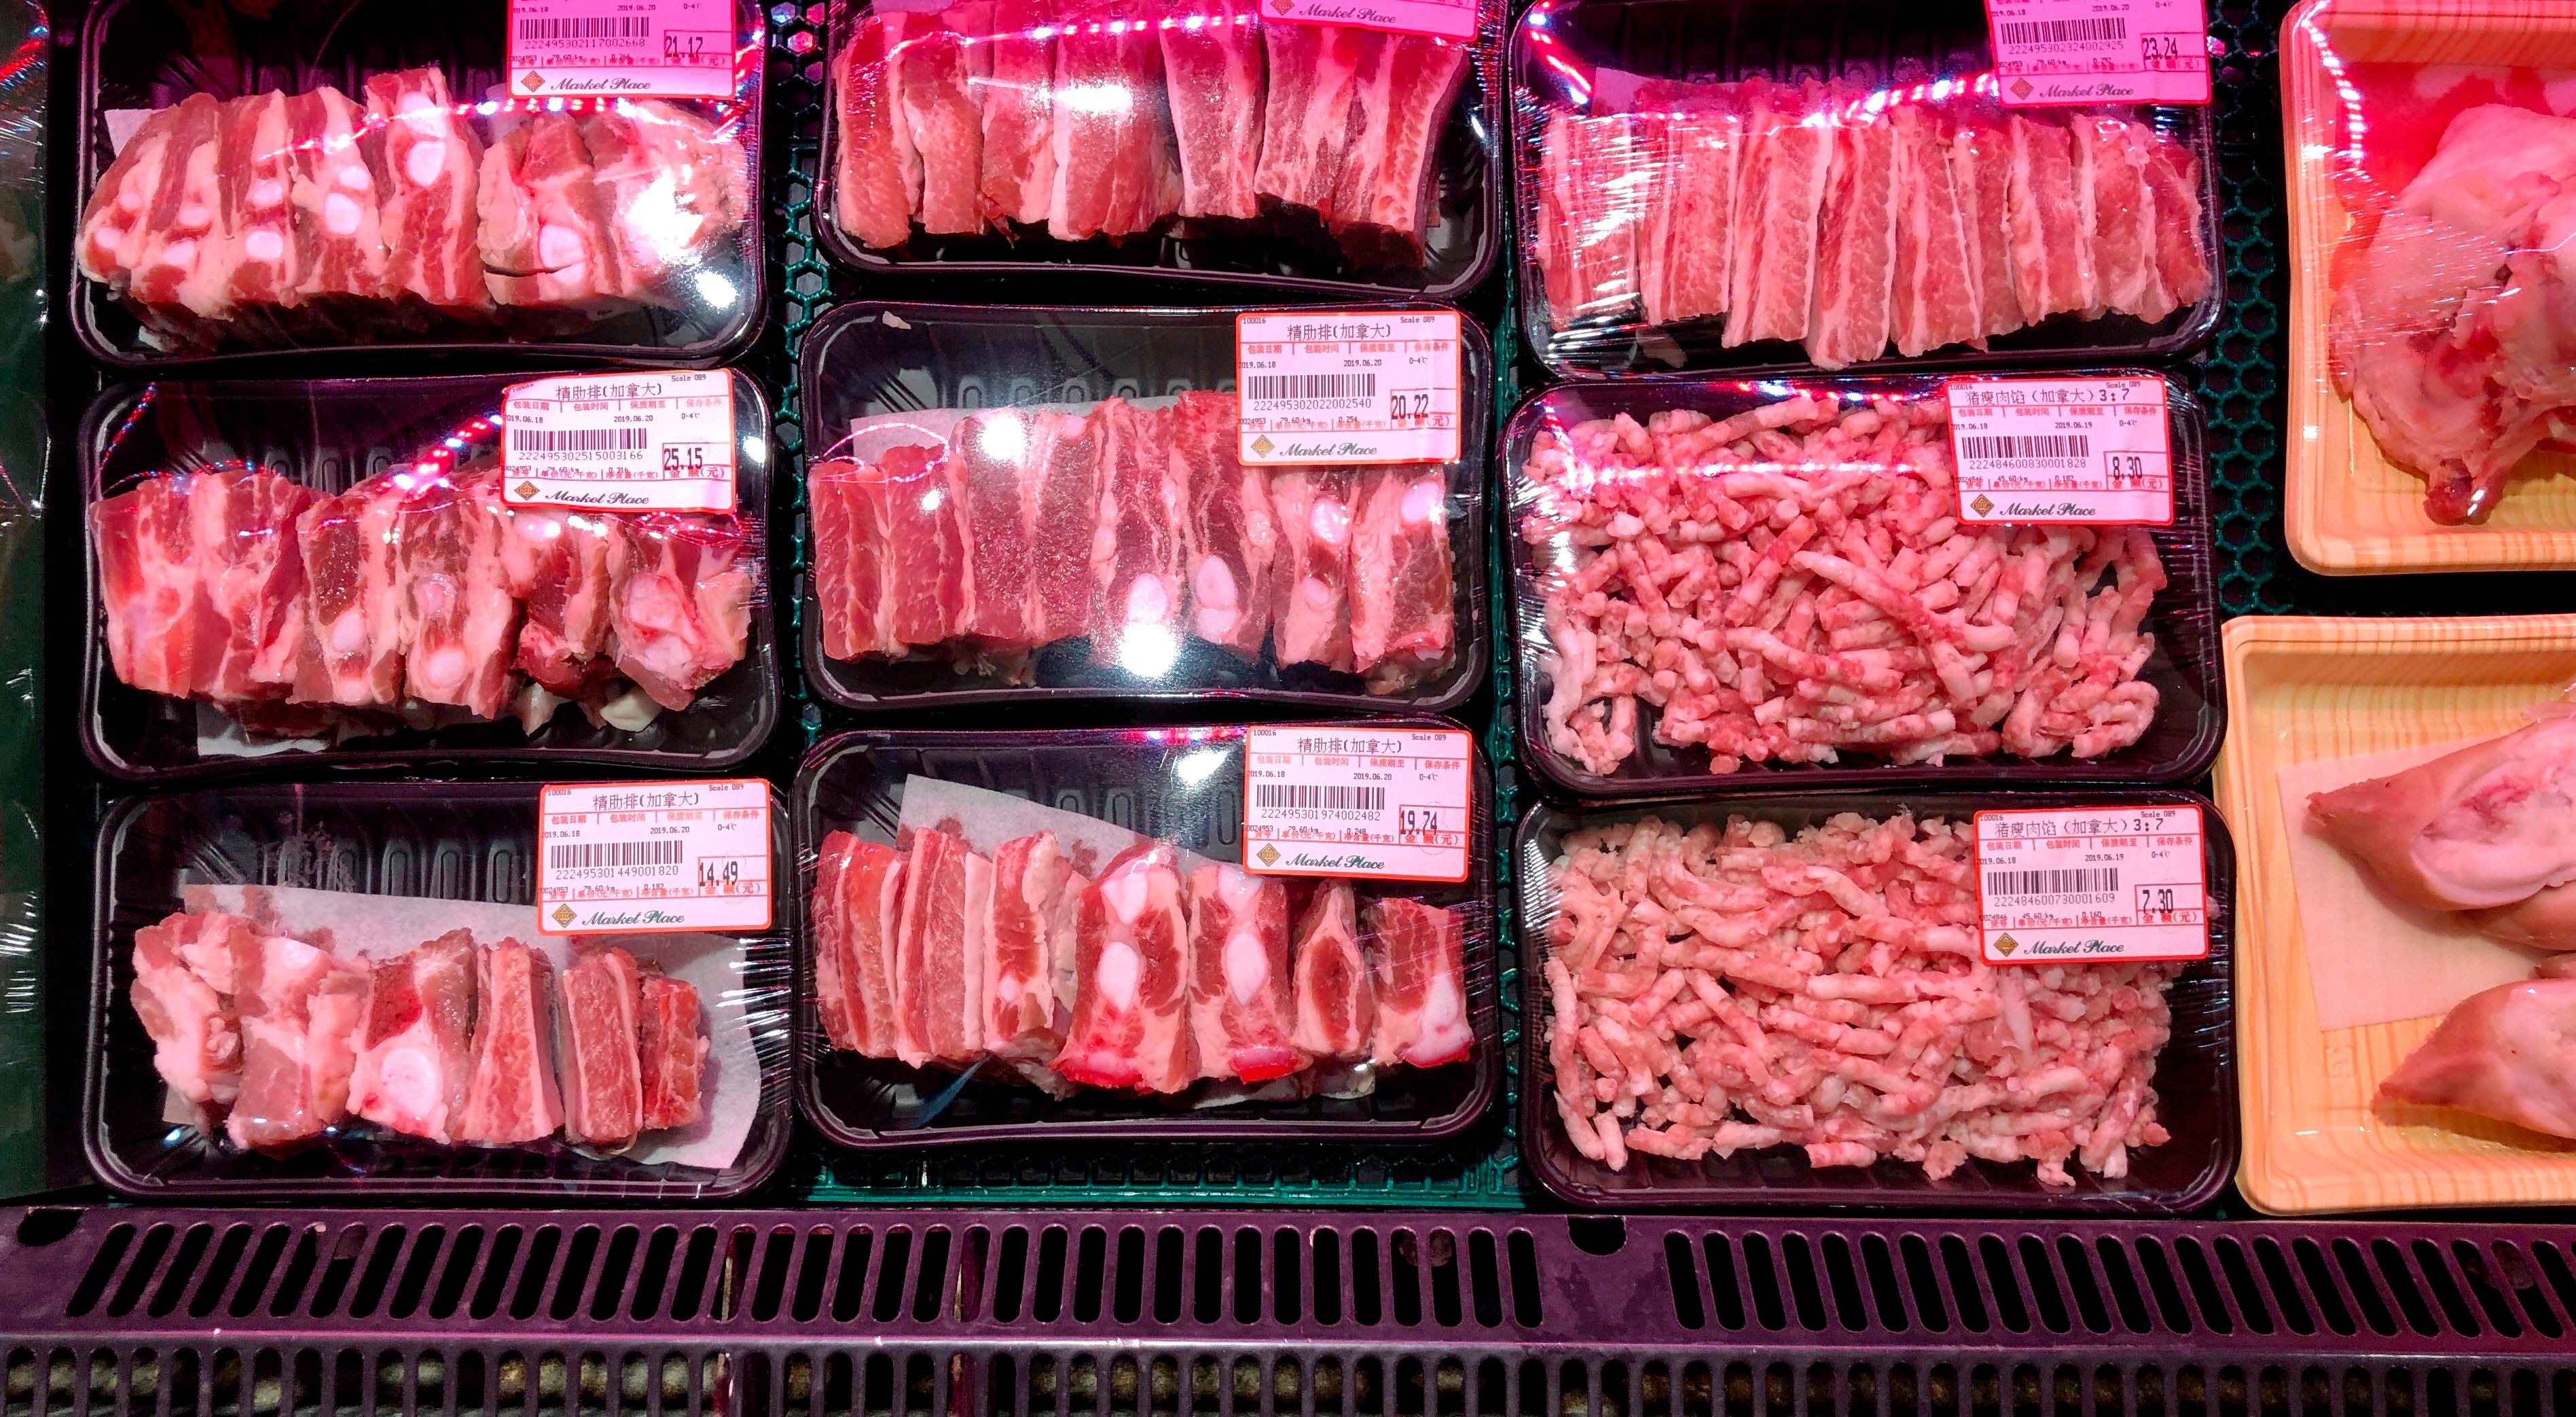 Pork prices are at a decade low because of 'too many hogs'